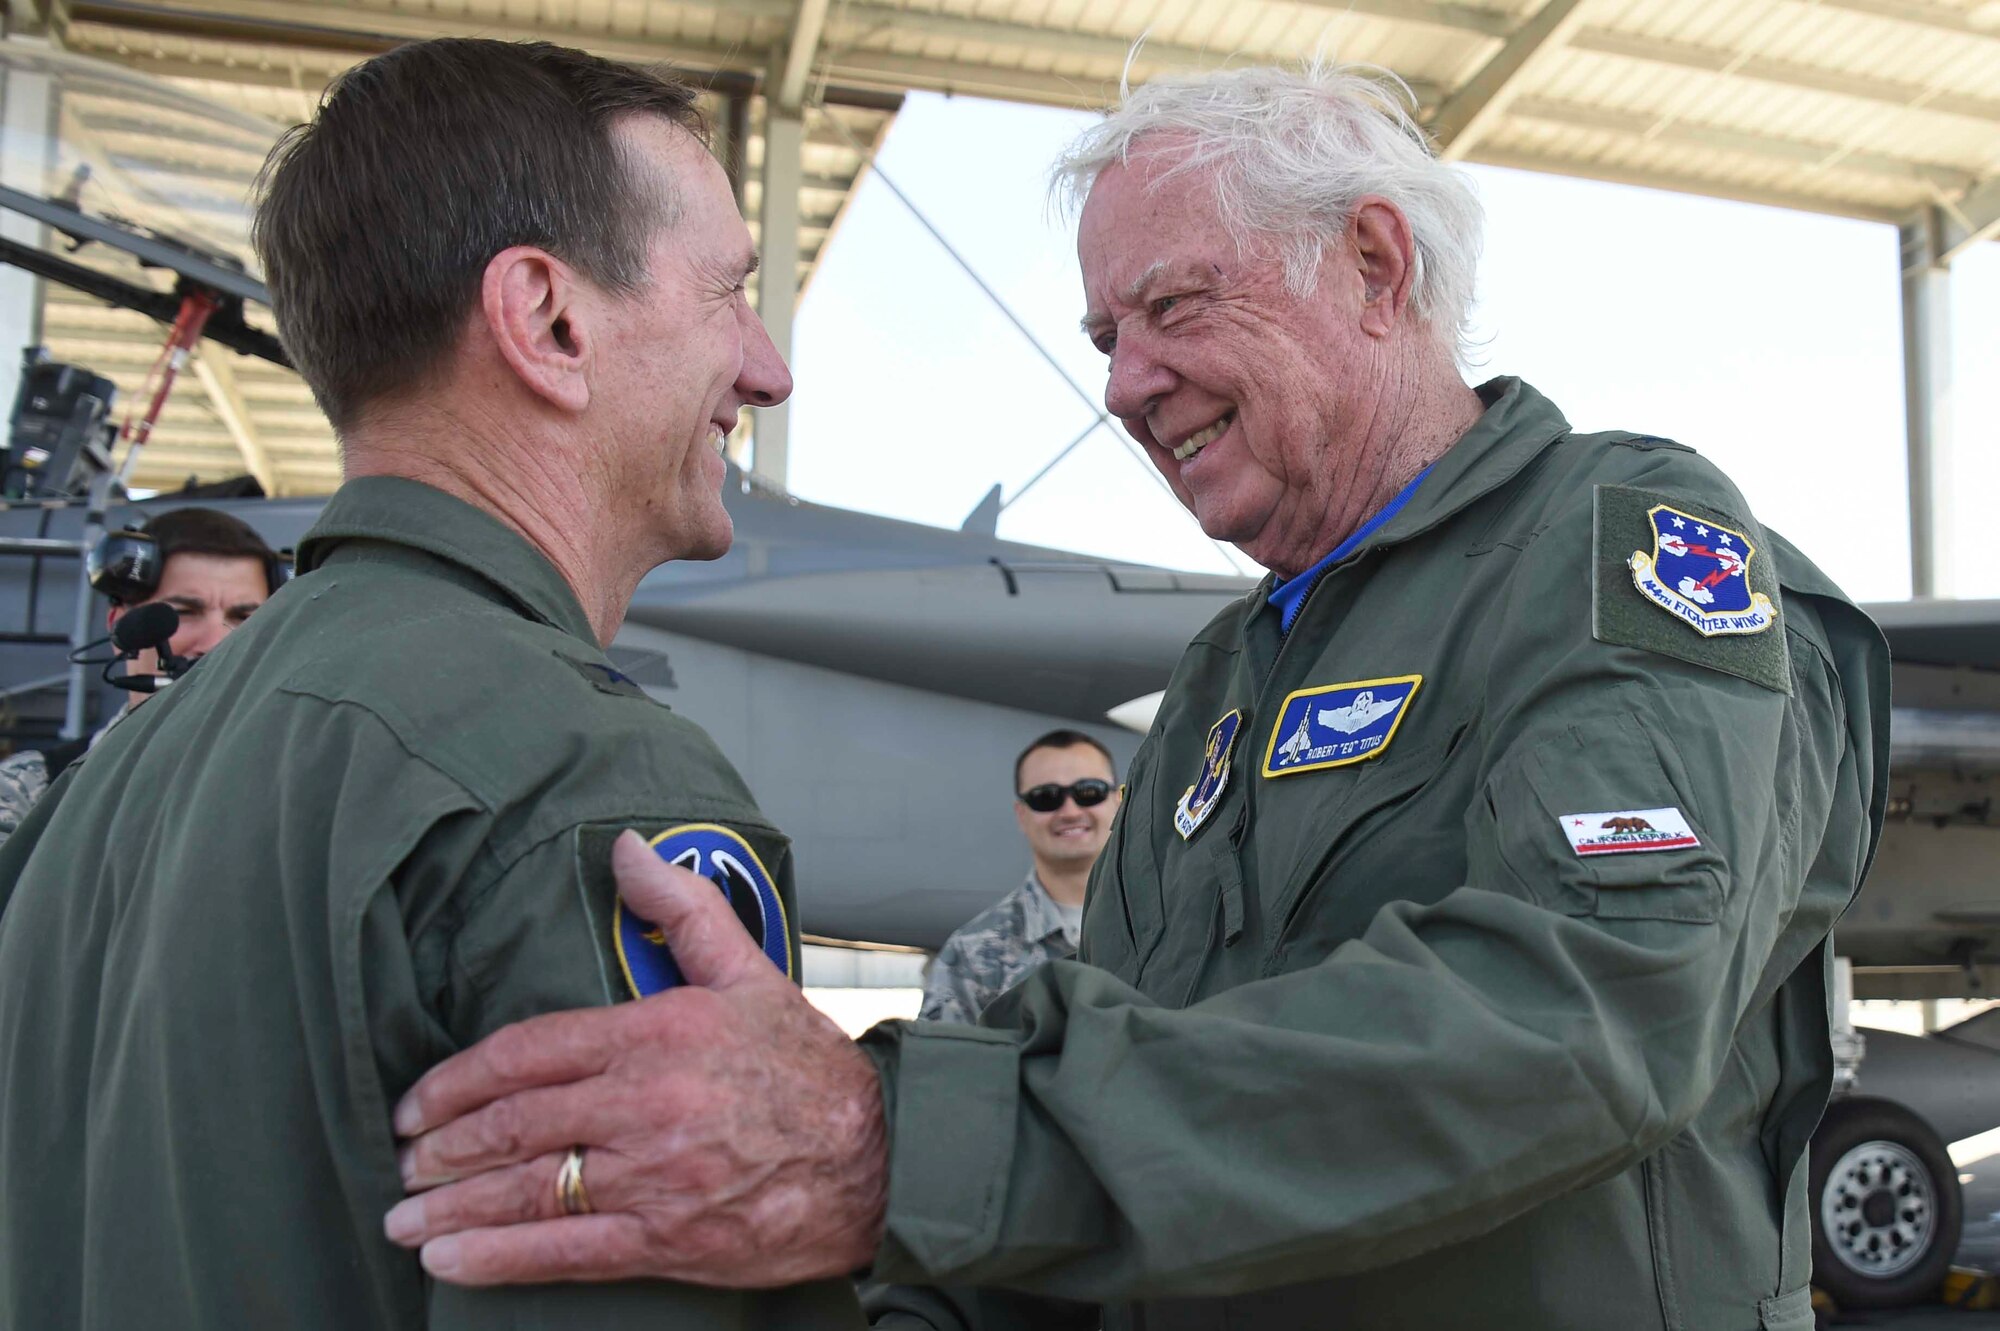 U.S. Air Force Brig. Gen. (ret.) Robert Earthquake Titus shakes hands with U.S. Air Force Brig. Gen. Clay Garrison, 144th Fighter Wing commander at the Fresno Air National Guard Base, April 1, 2016. Titus is the 144th FW's 3rd Annual Heritage Week honored guest, who shared his personal experiences as a fighter pilot with the 144th FW Airmen. (U.S. Air National Guard photo by Senior Airman Klynne Pearl Serrano)